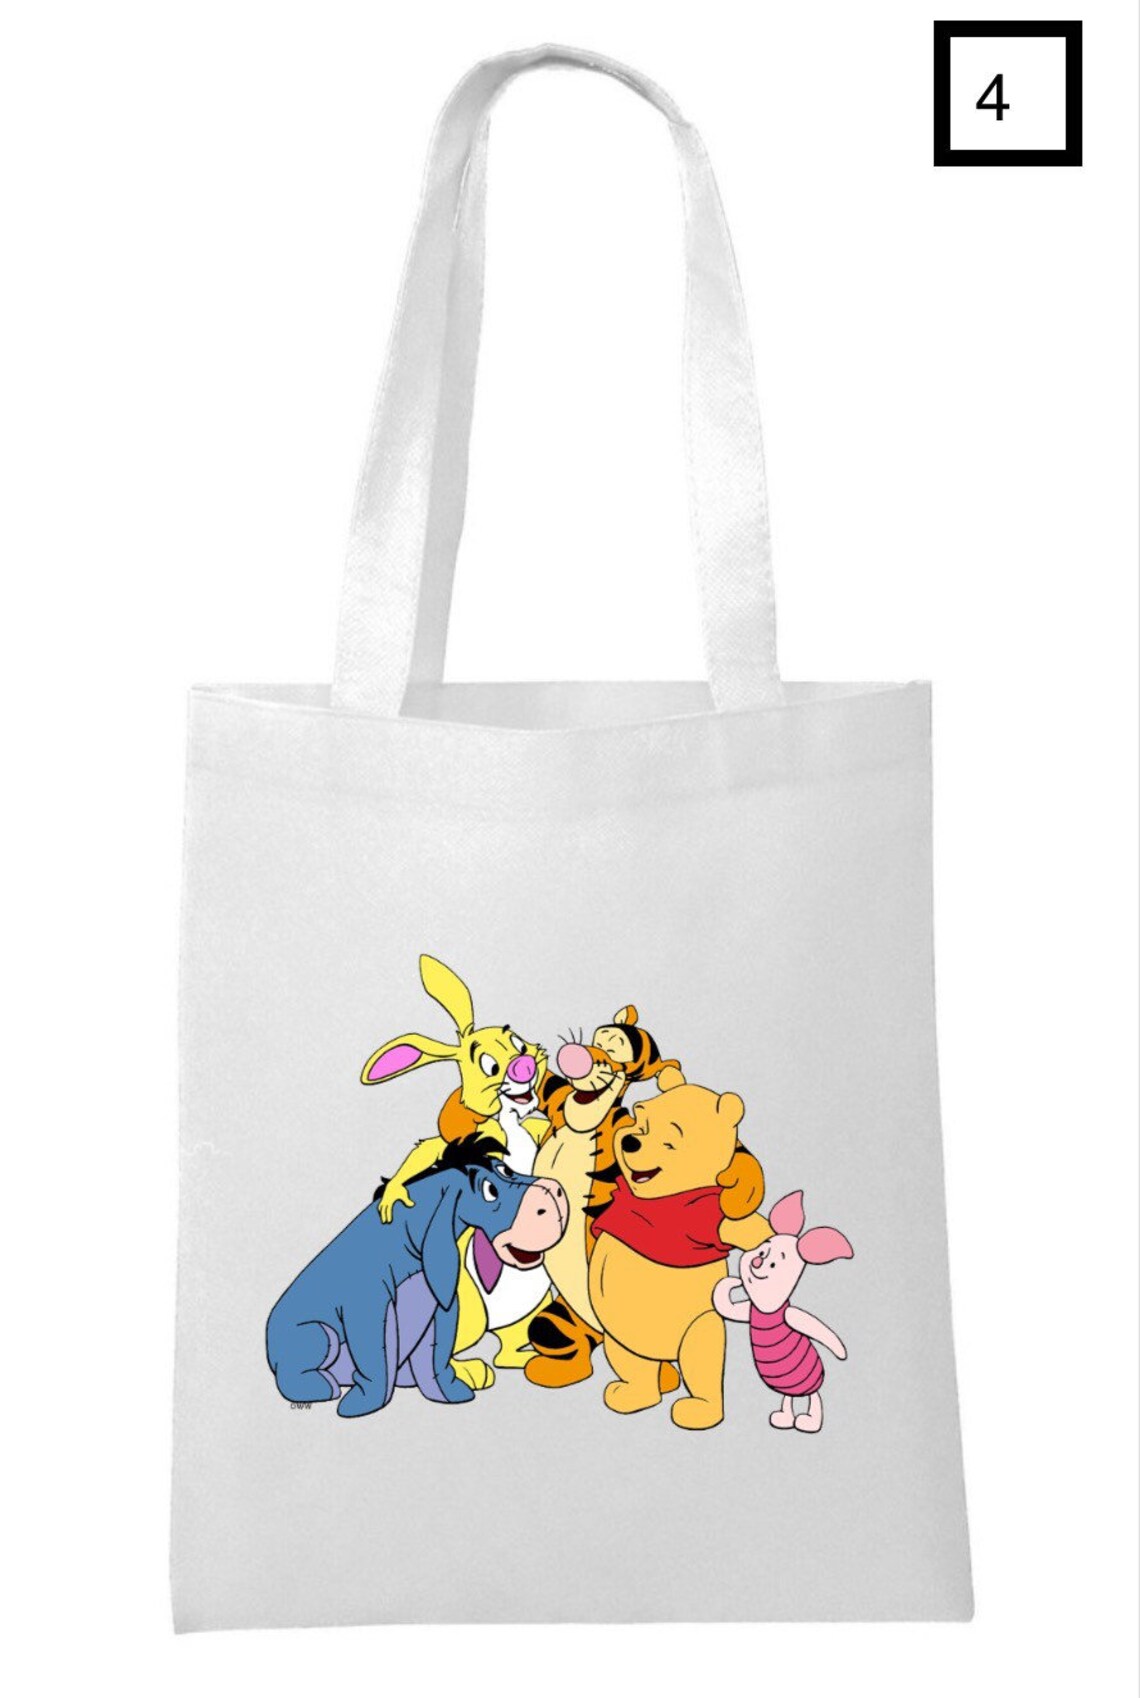 NEW Winnie the Pooh Character Tote Bag Made in the USA | Etsy